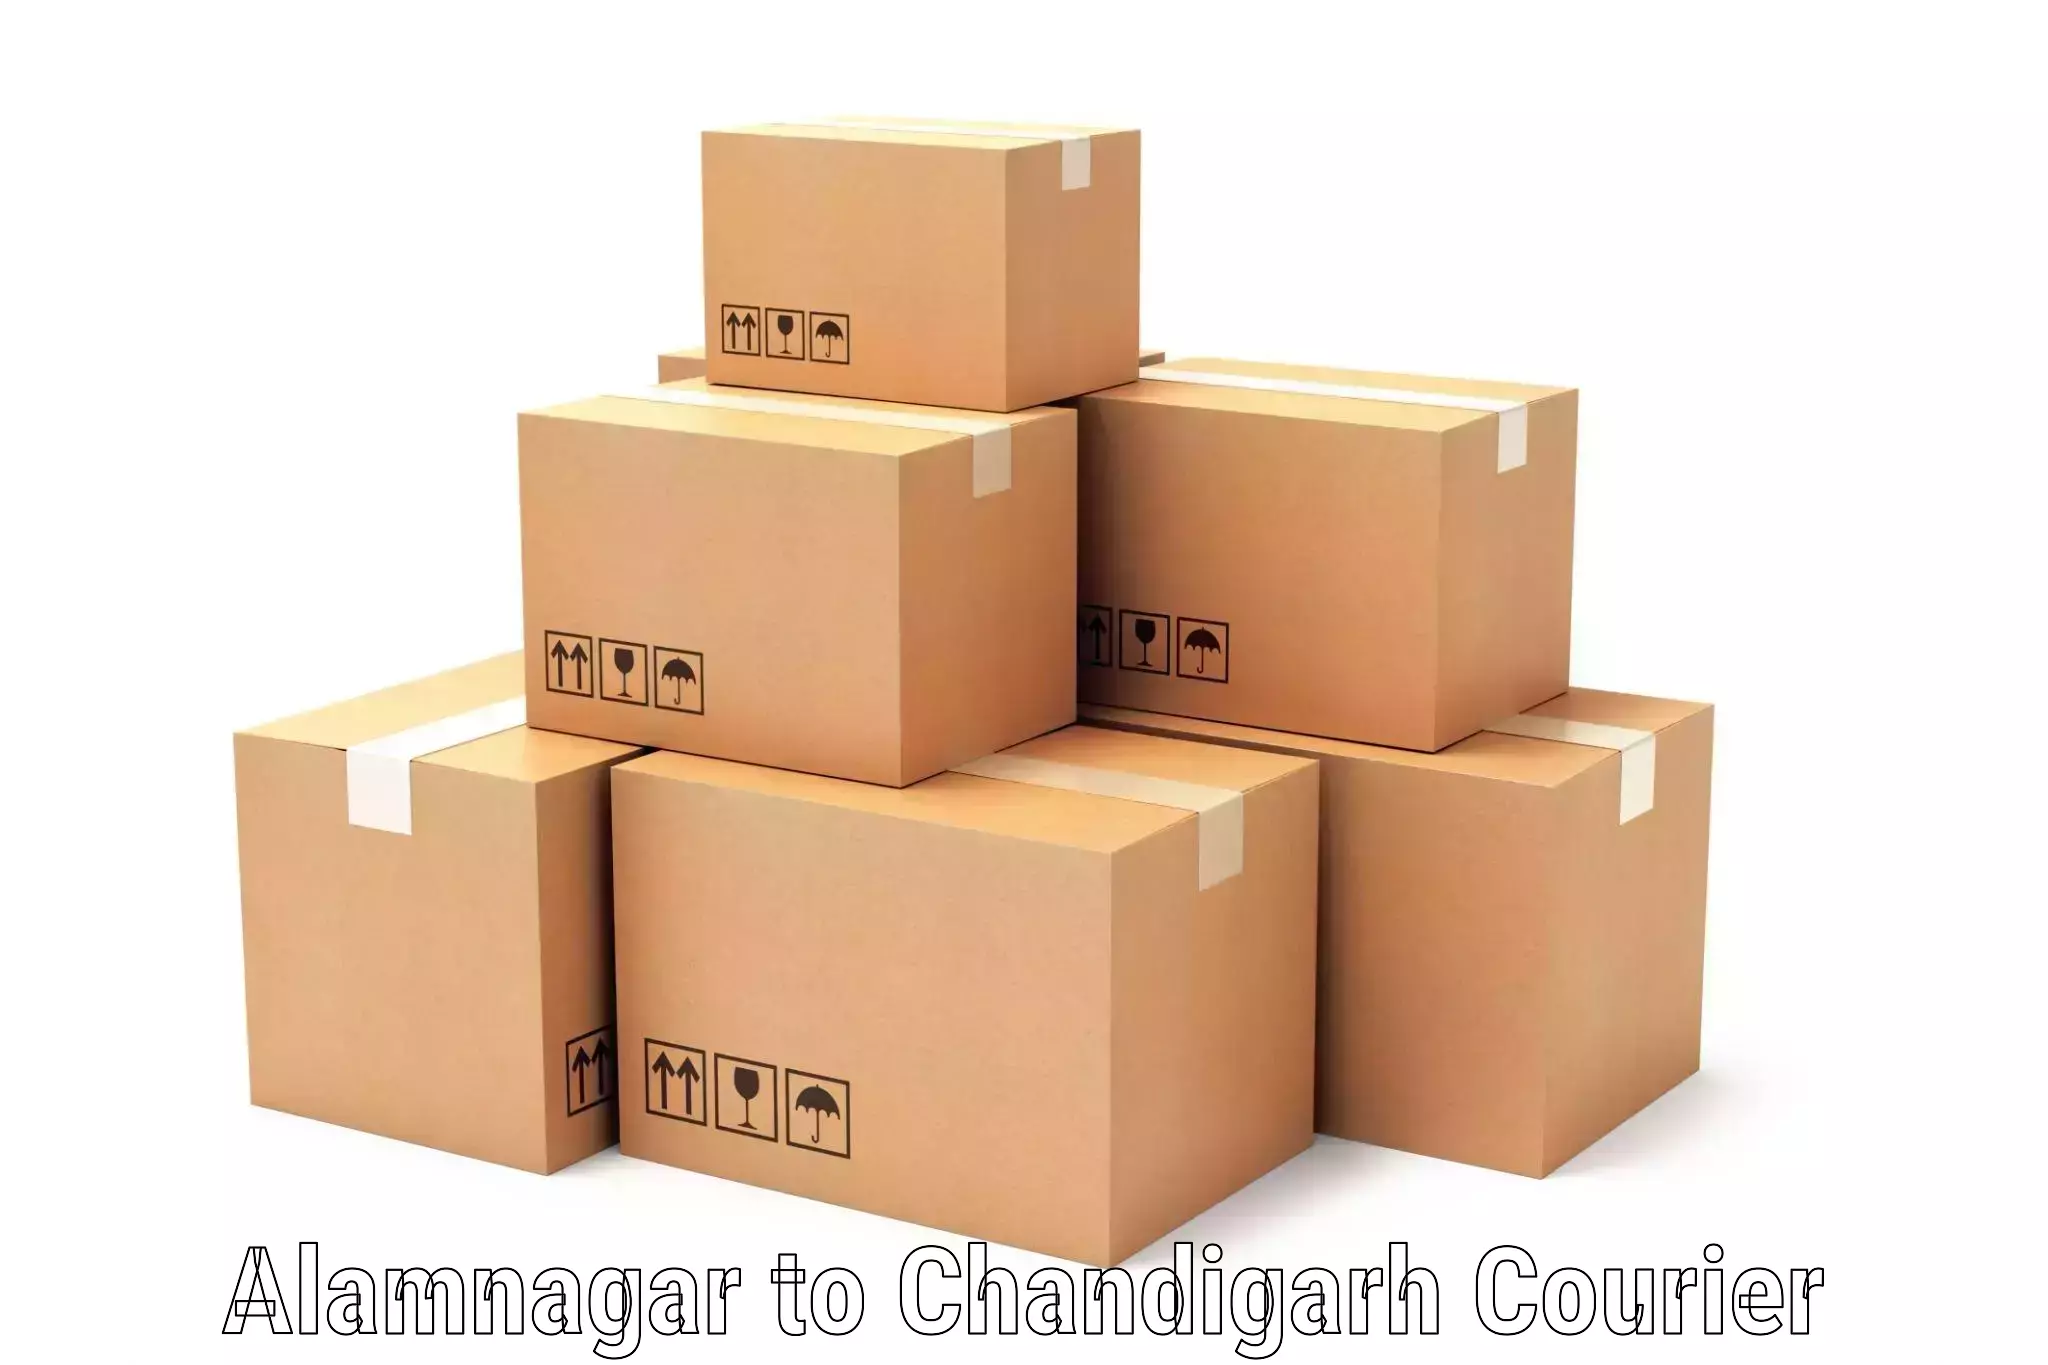 End-to-end delivery in Alamnagar to Chandigarh